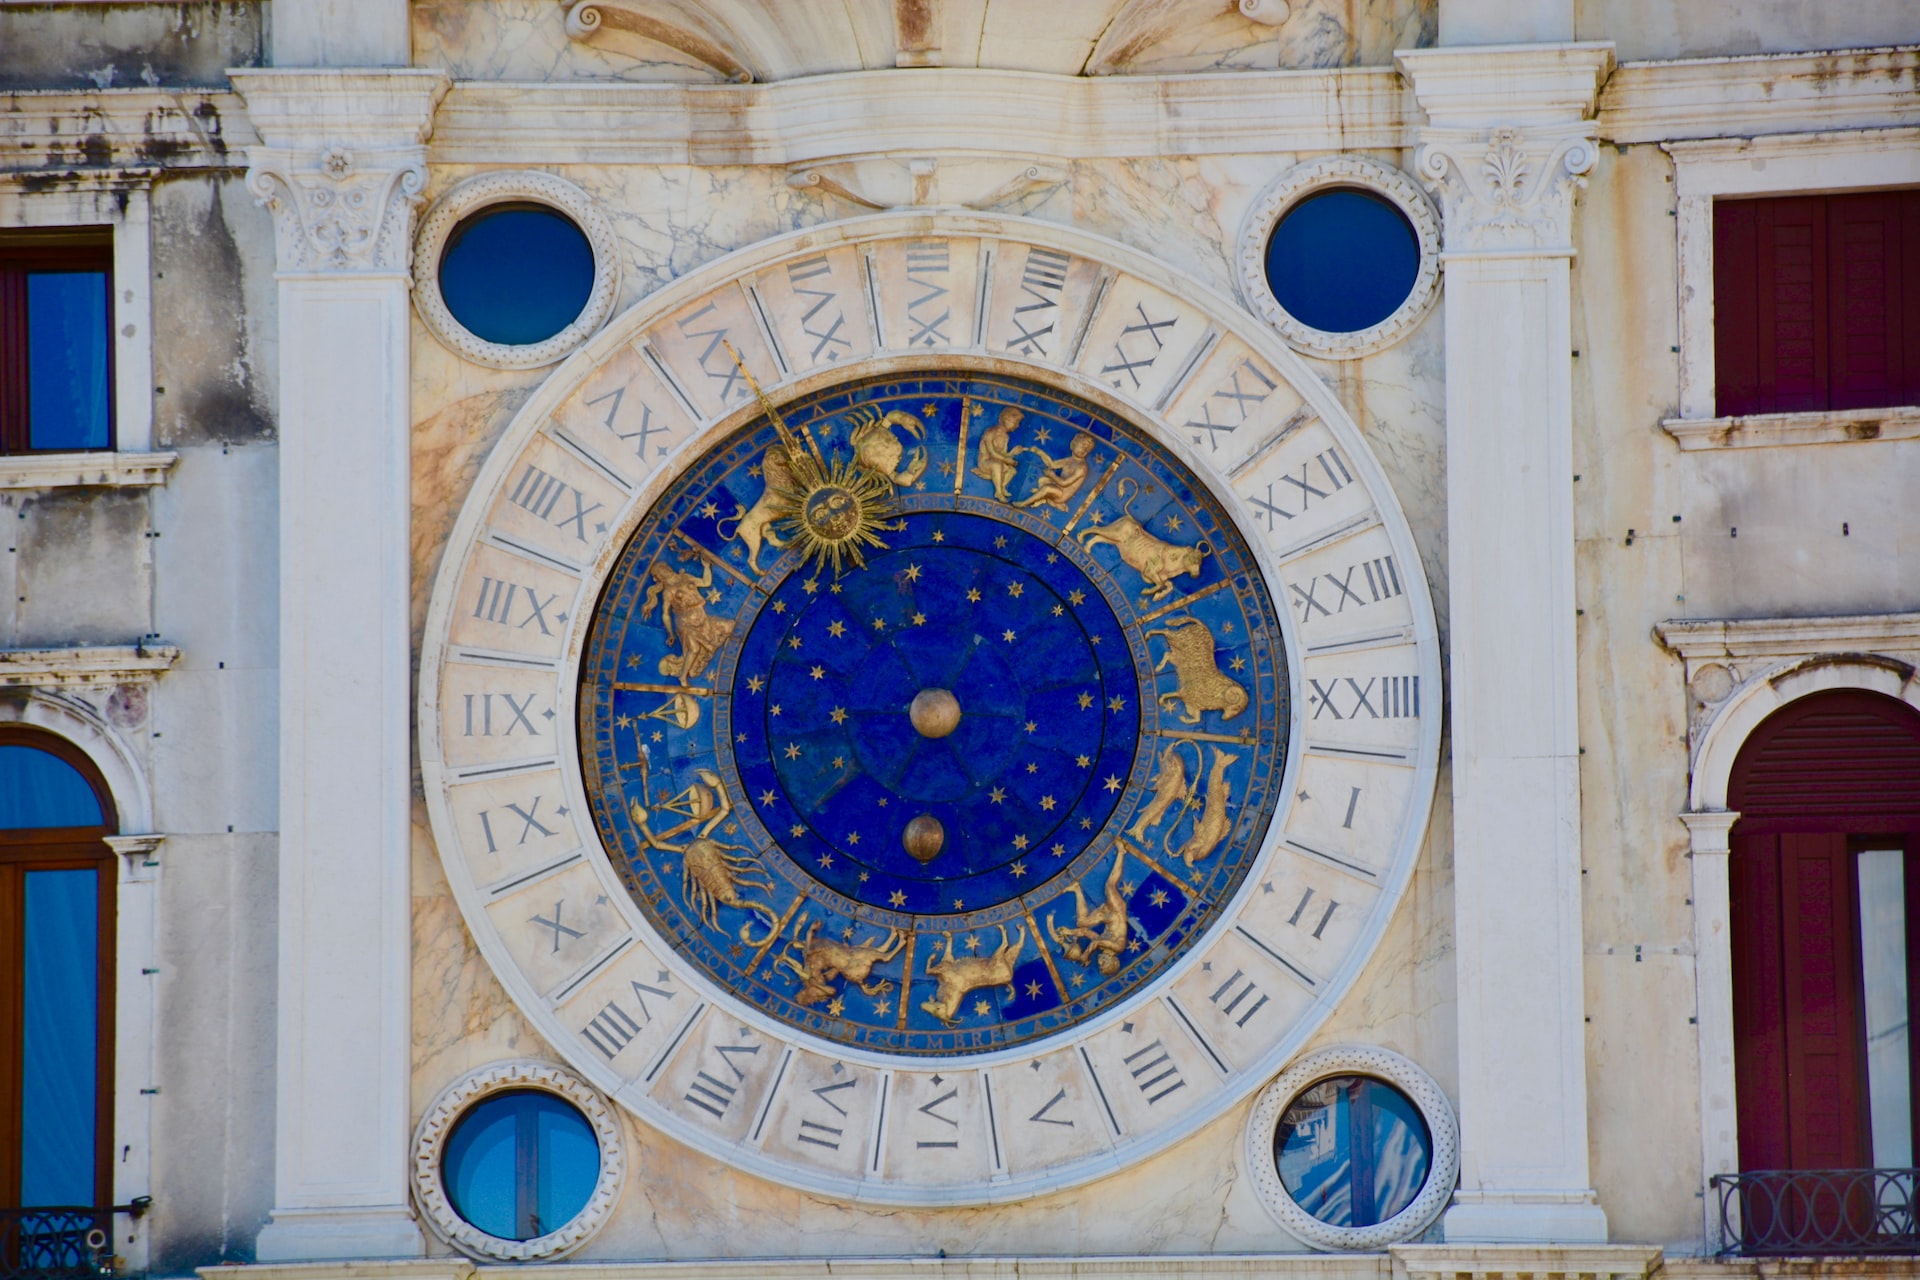 A wall with a clock-like design with the roman numerals and zodiac signs 